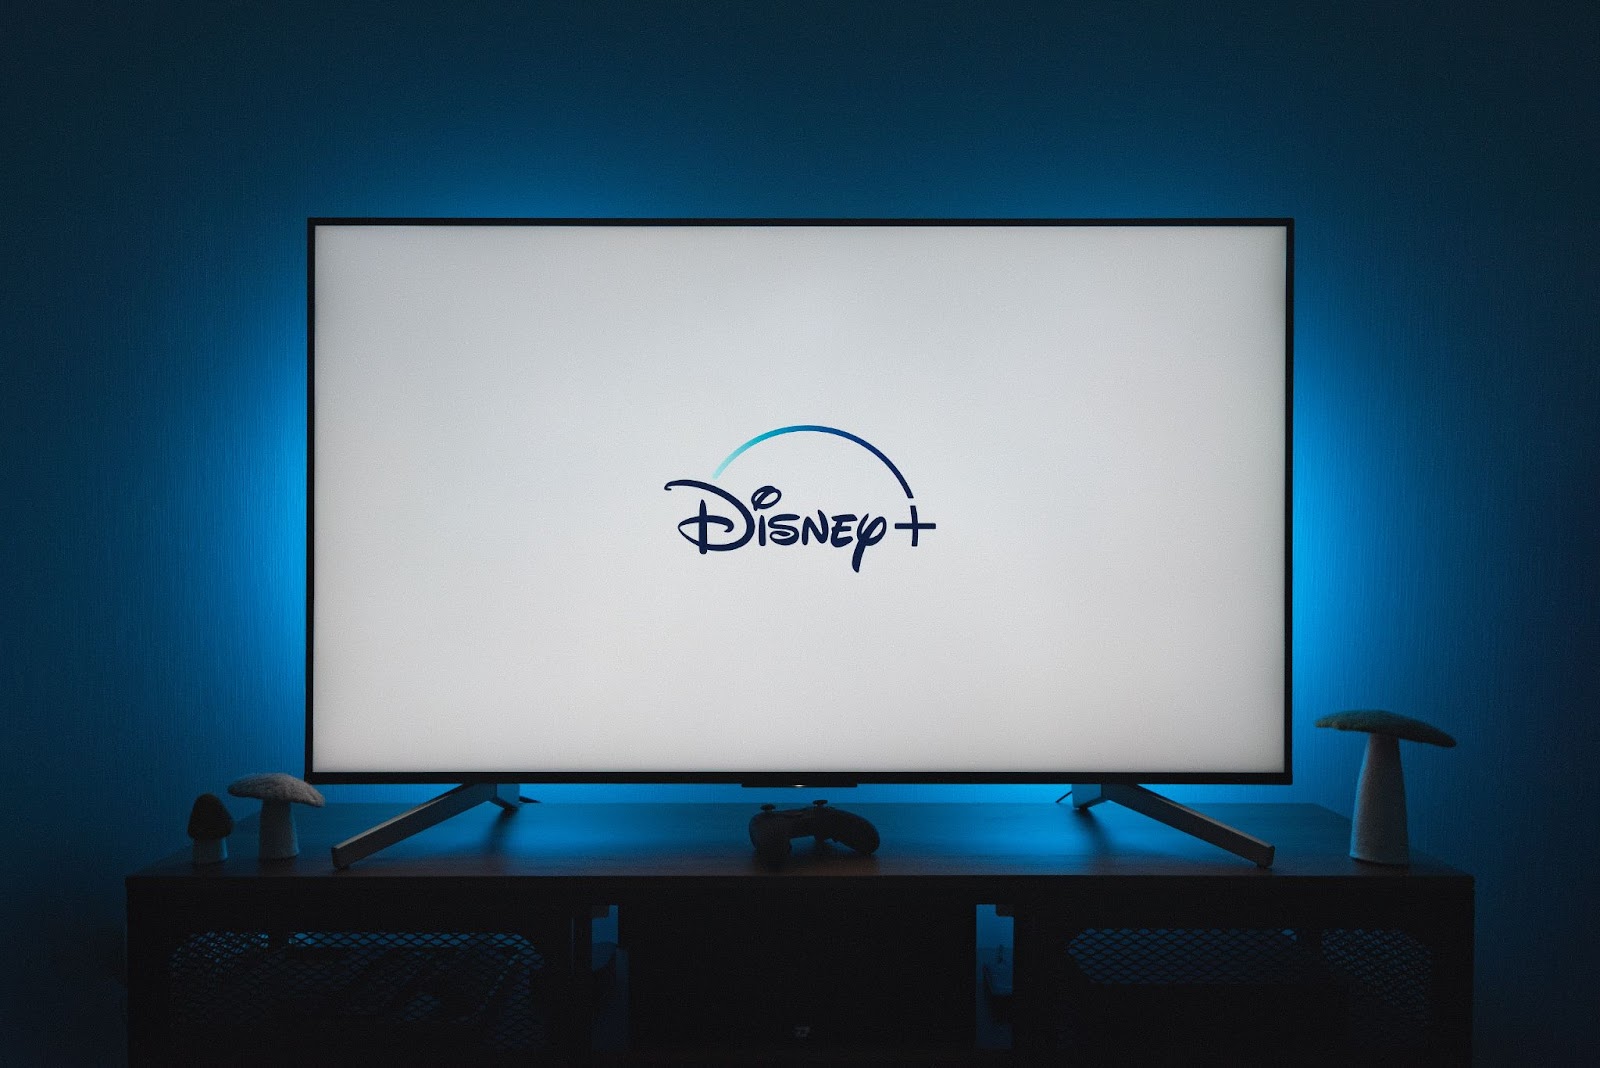 Why is Disney not working on Google TV?